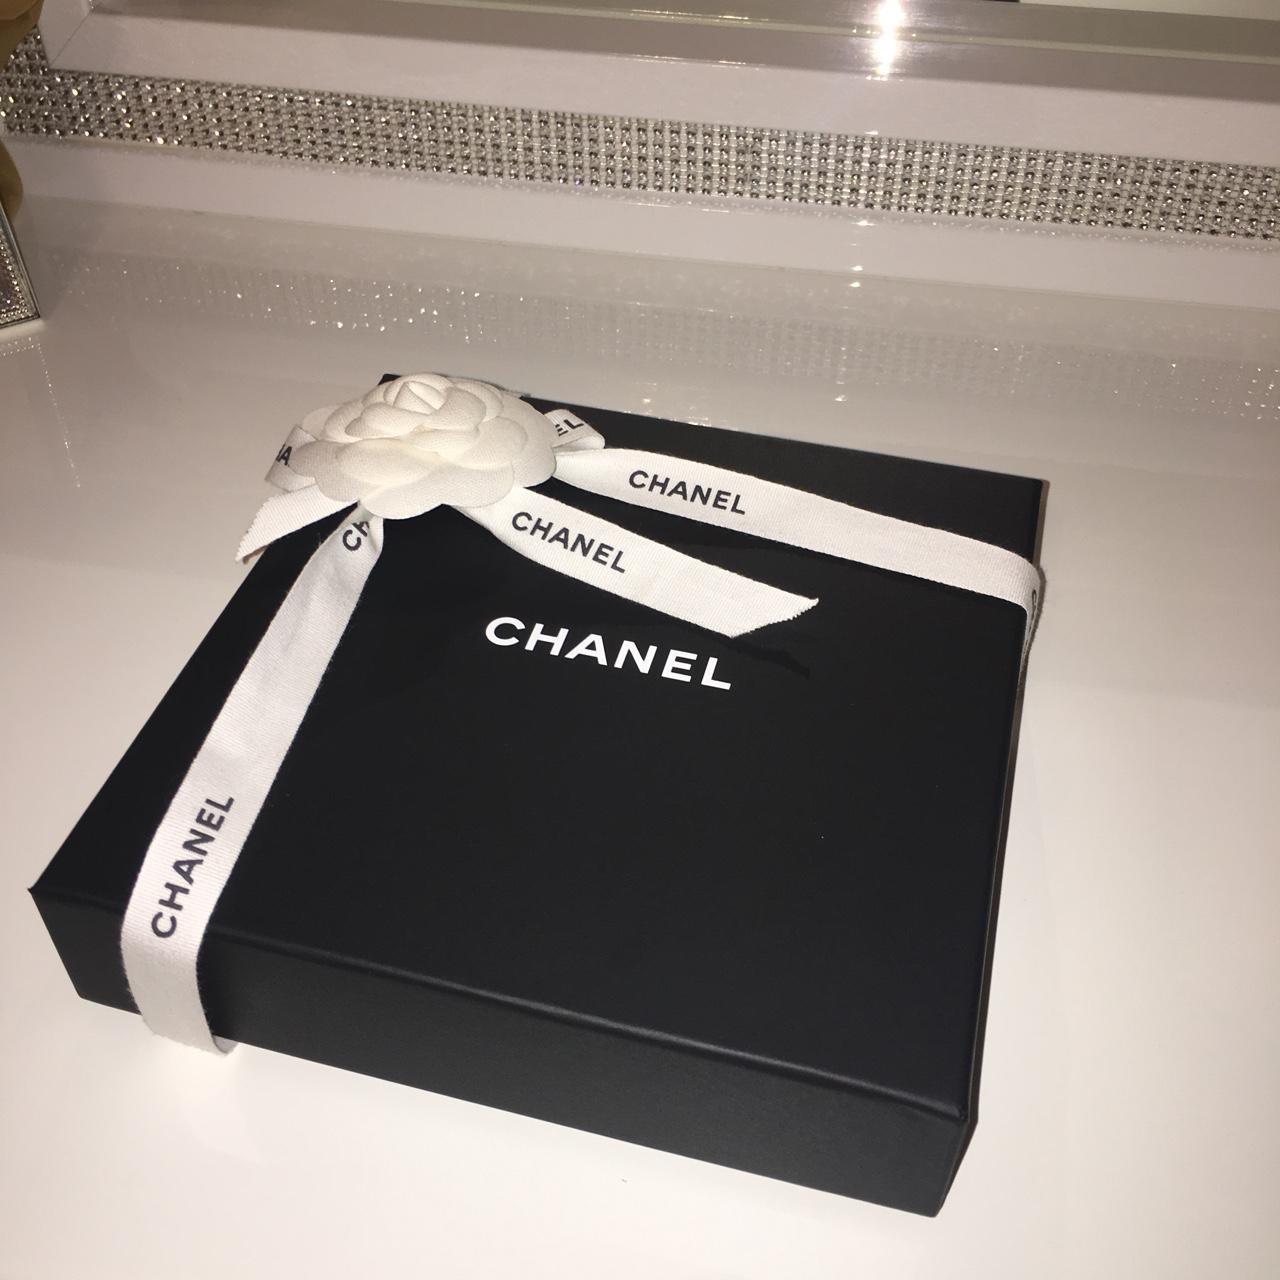 Selling this 100% authentic Chanel box with a ribbon